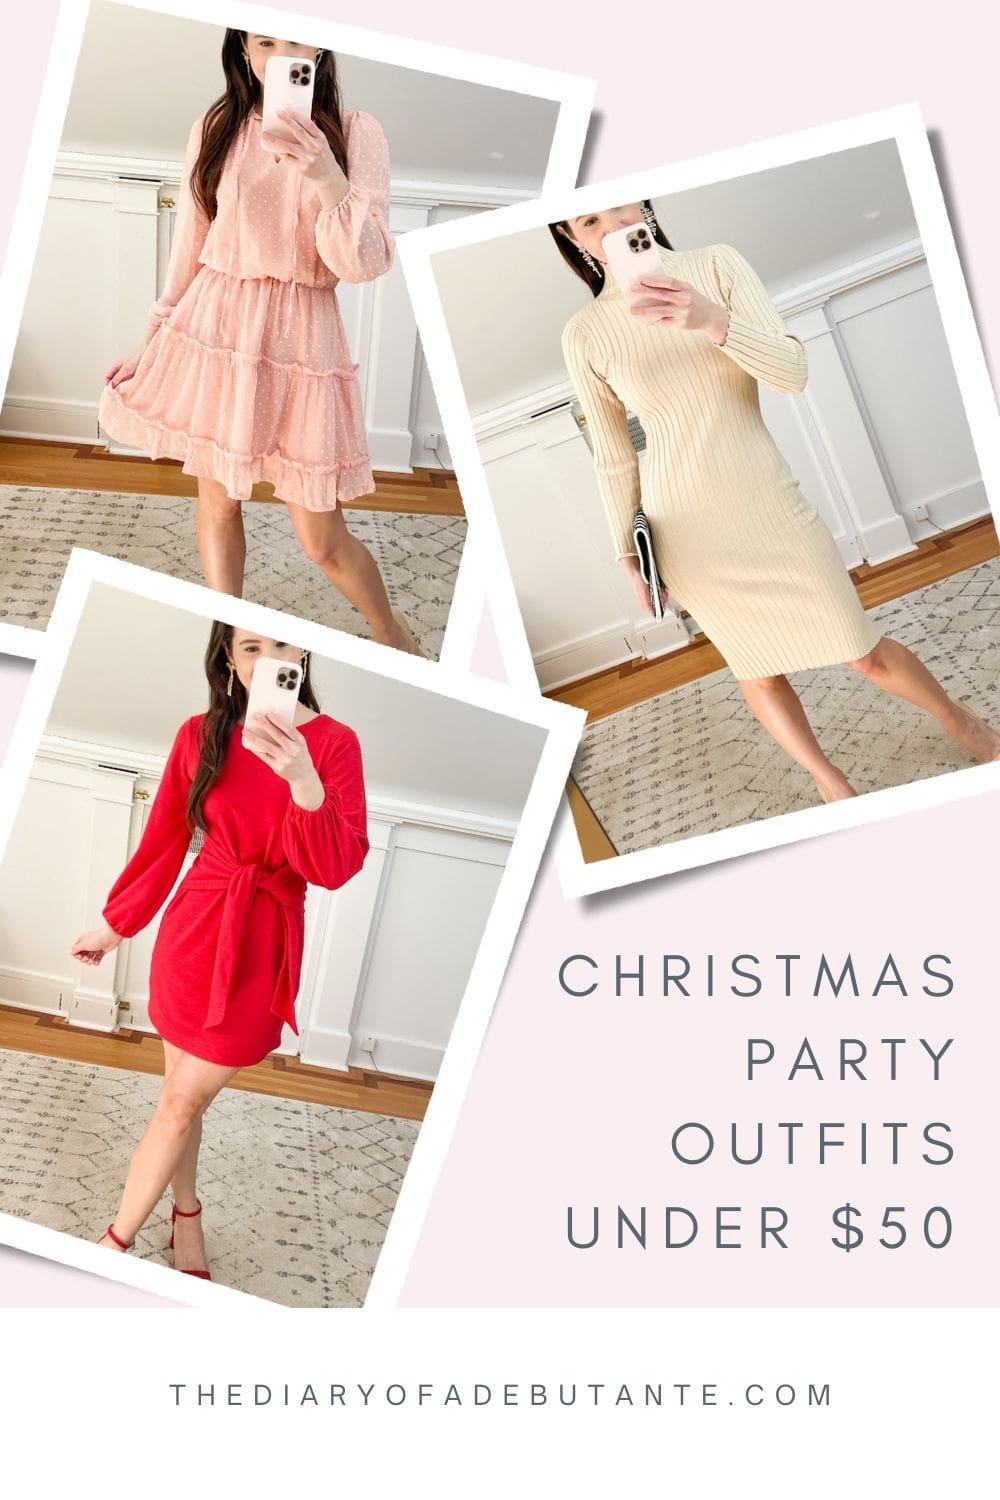 Christmas party outfits under $50 styled by affordable fashion blogger Stephanie Ziajka on Diary of a Debutante